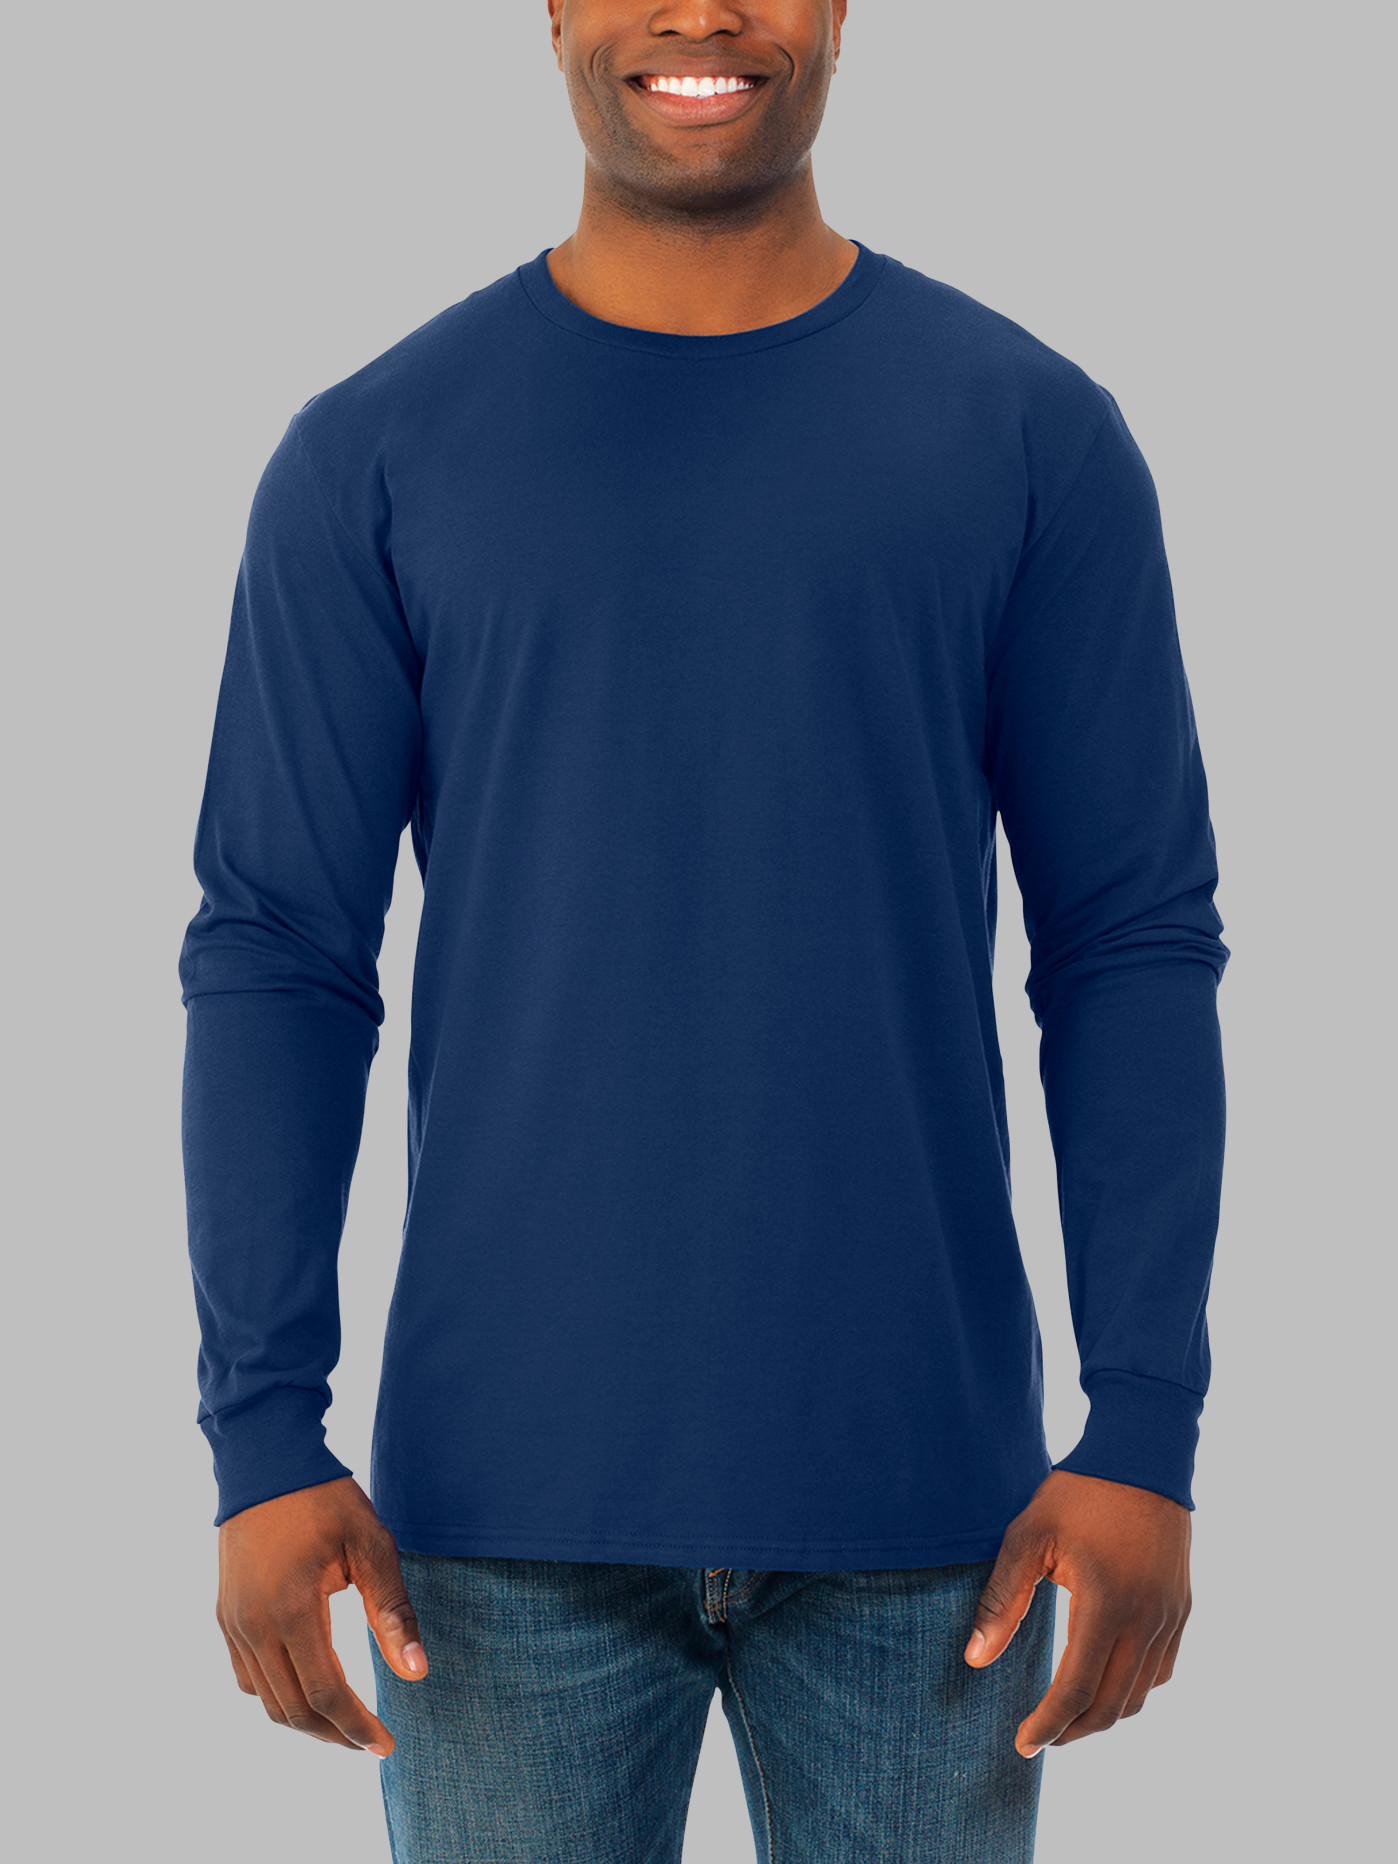 Soft Long Sleeve Crew Neck T Shirt   Fruit of the Loom